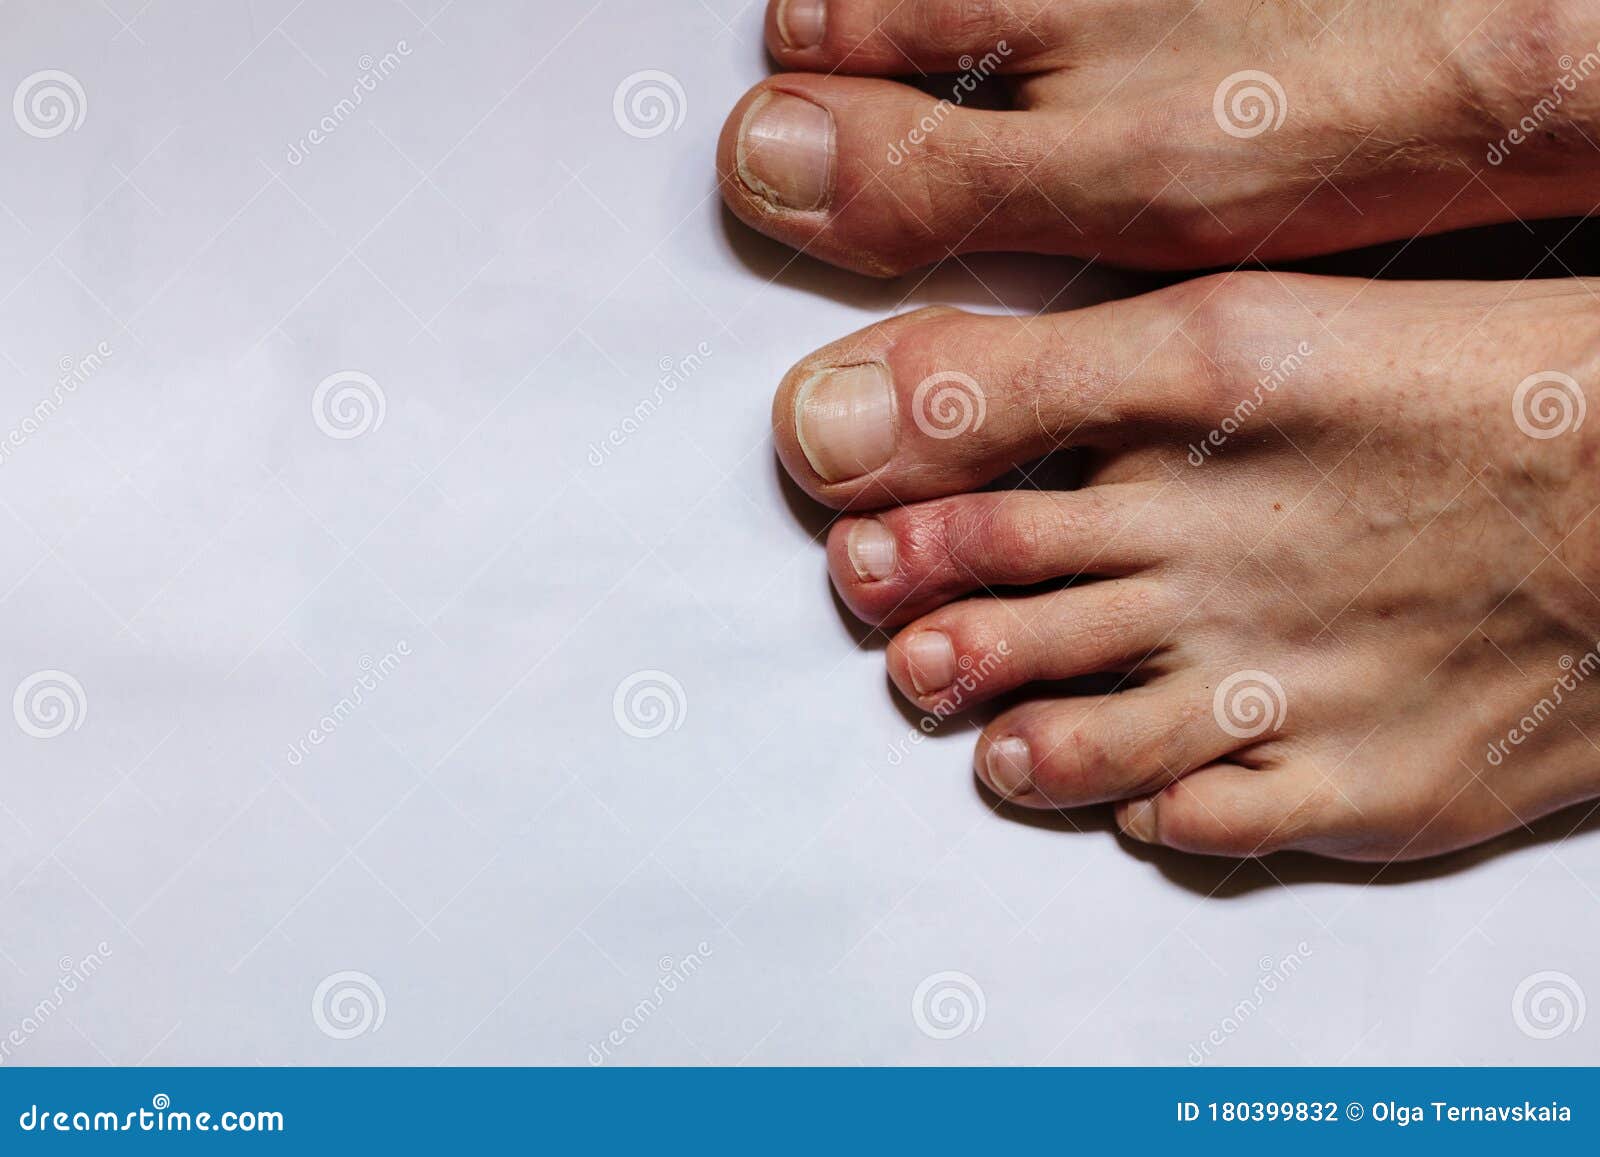 covid toes . another another symptom of coronavirus infection. painful red and purple bumps that tend to occur at the tips of the